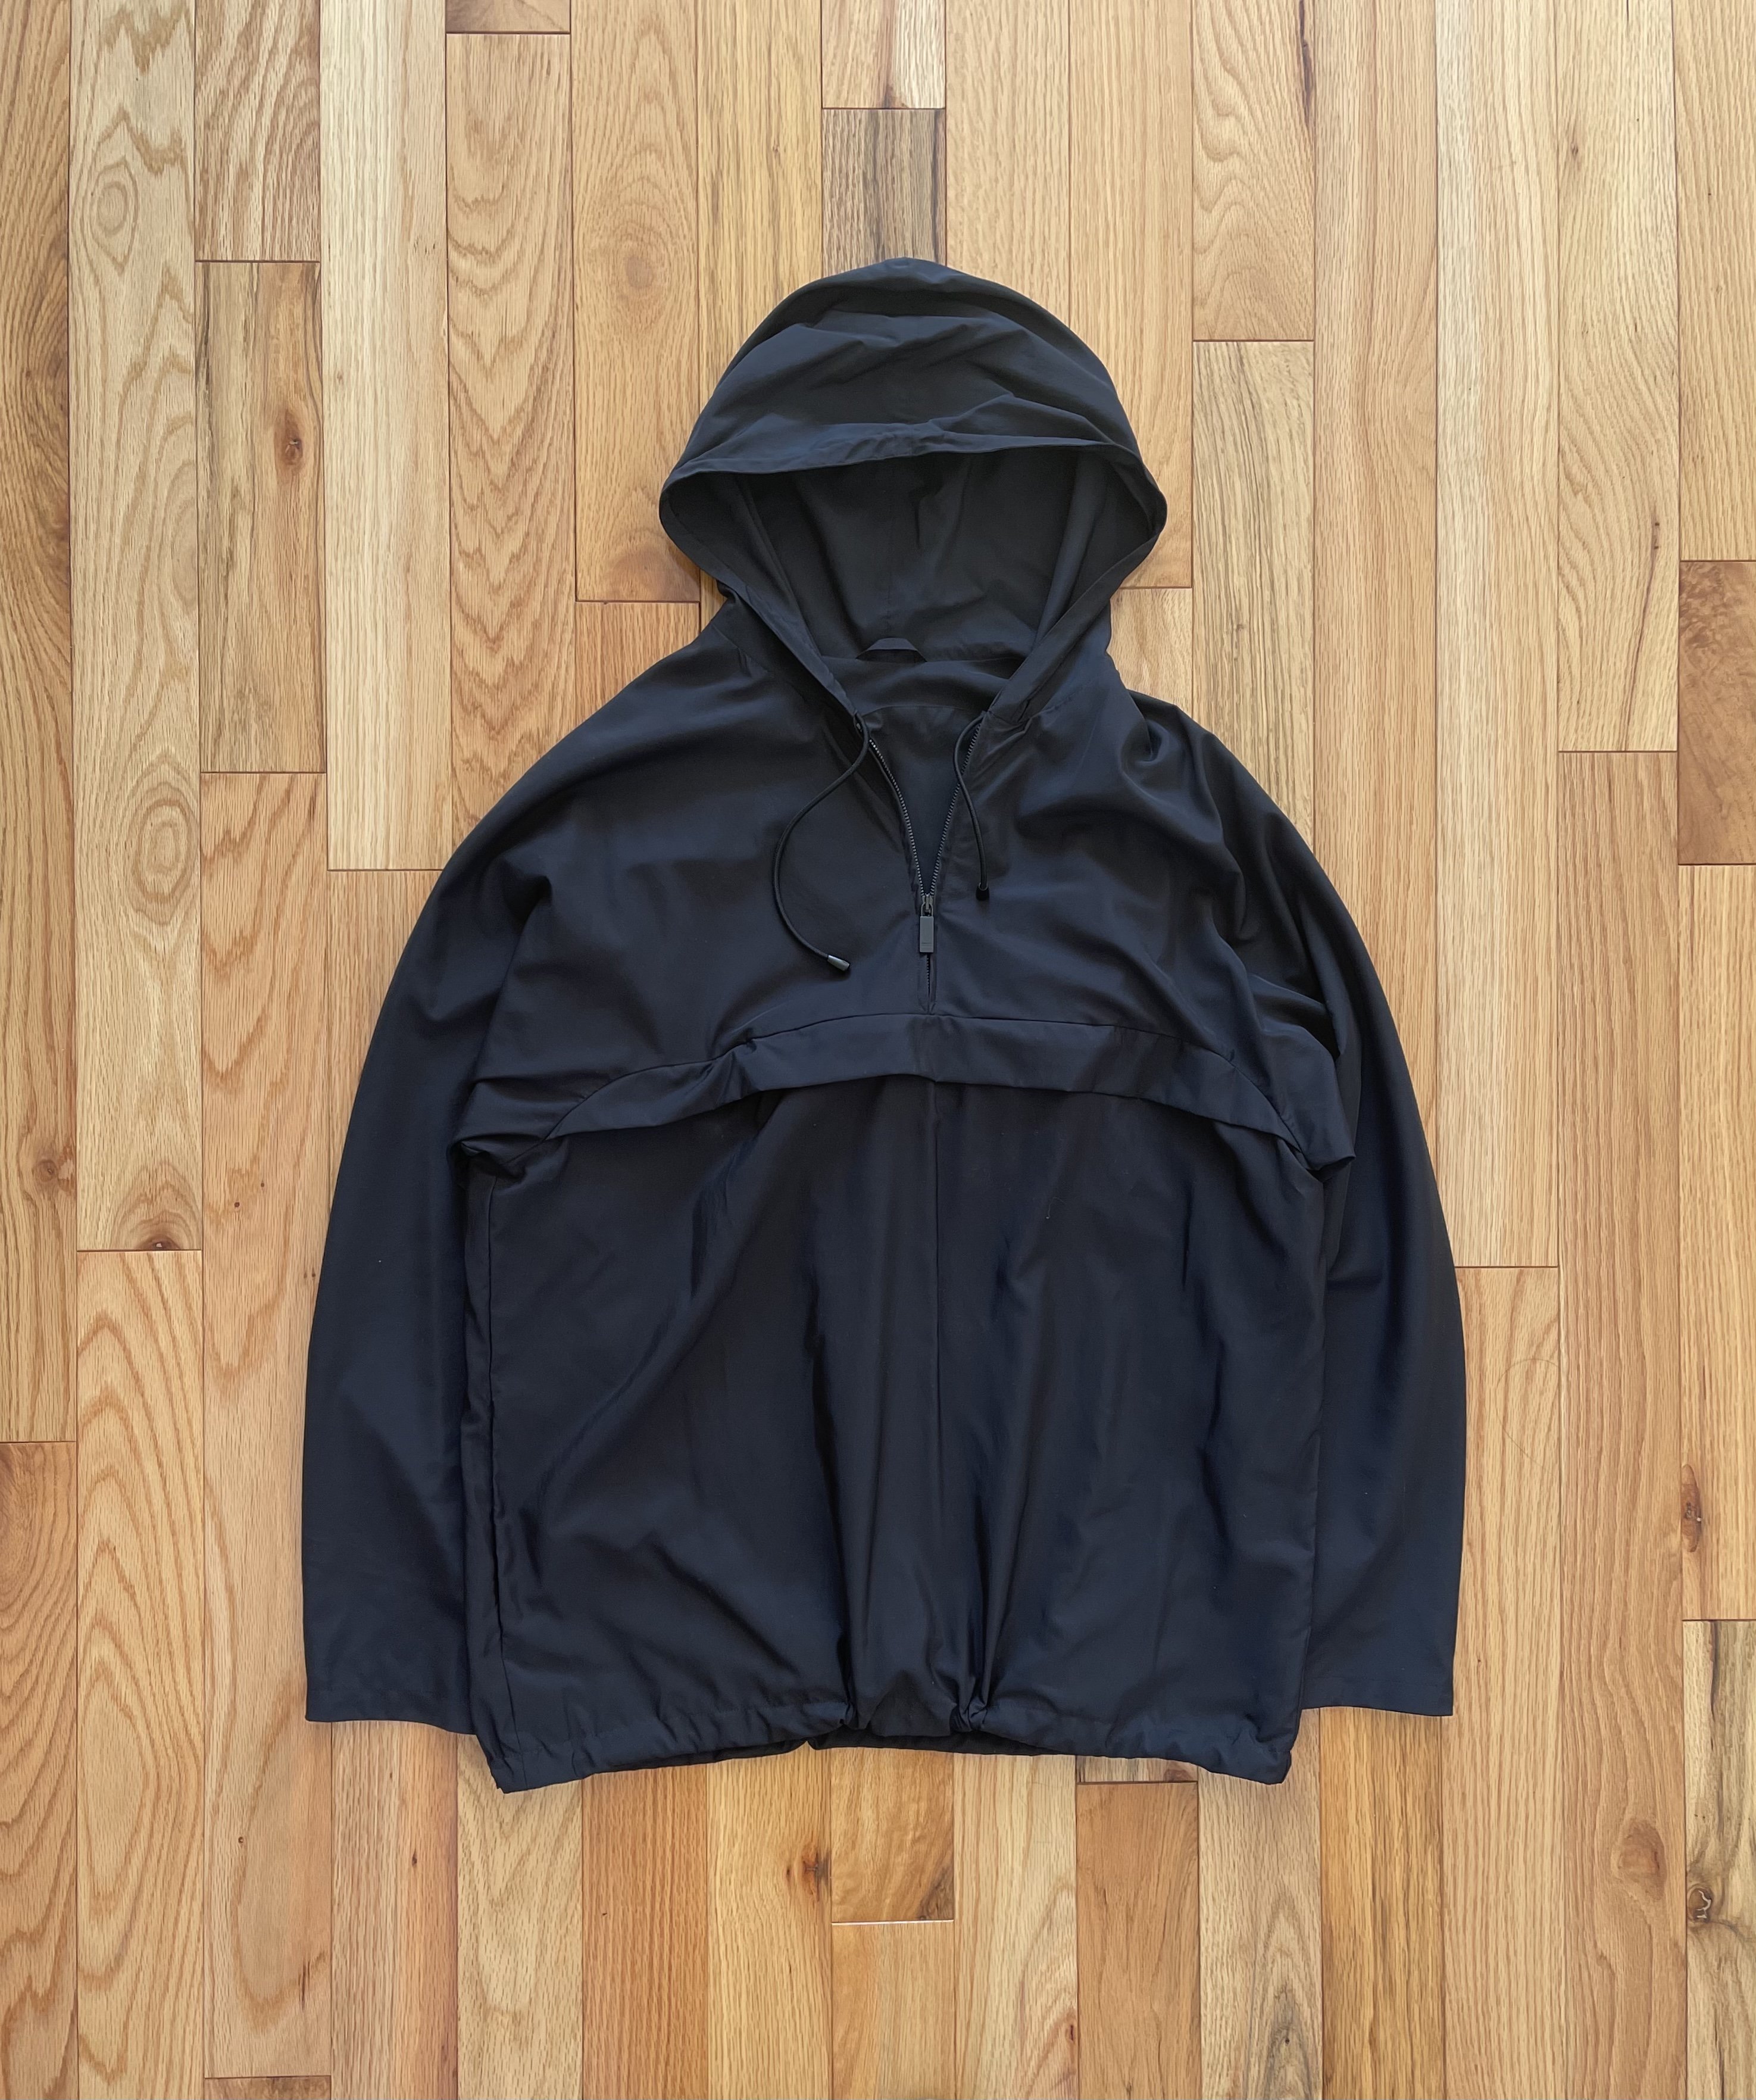 Gucci by Tom Ford Packable Nylon Anorak Jacket | Reissue: Buy